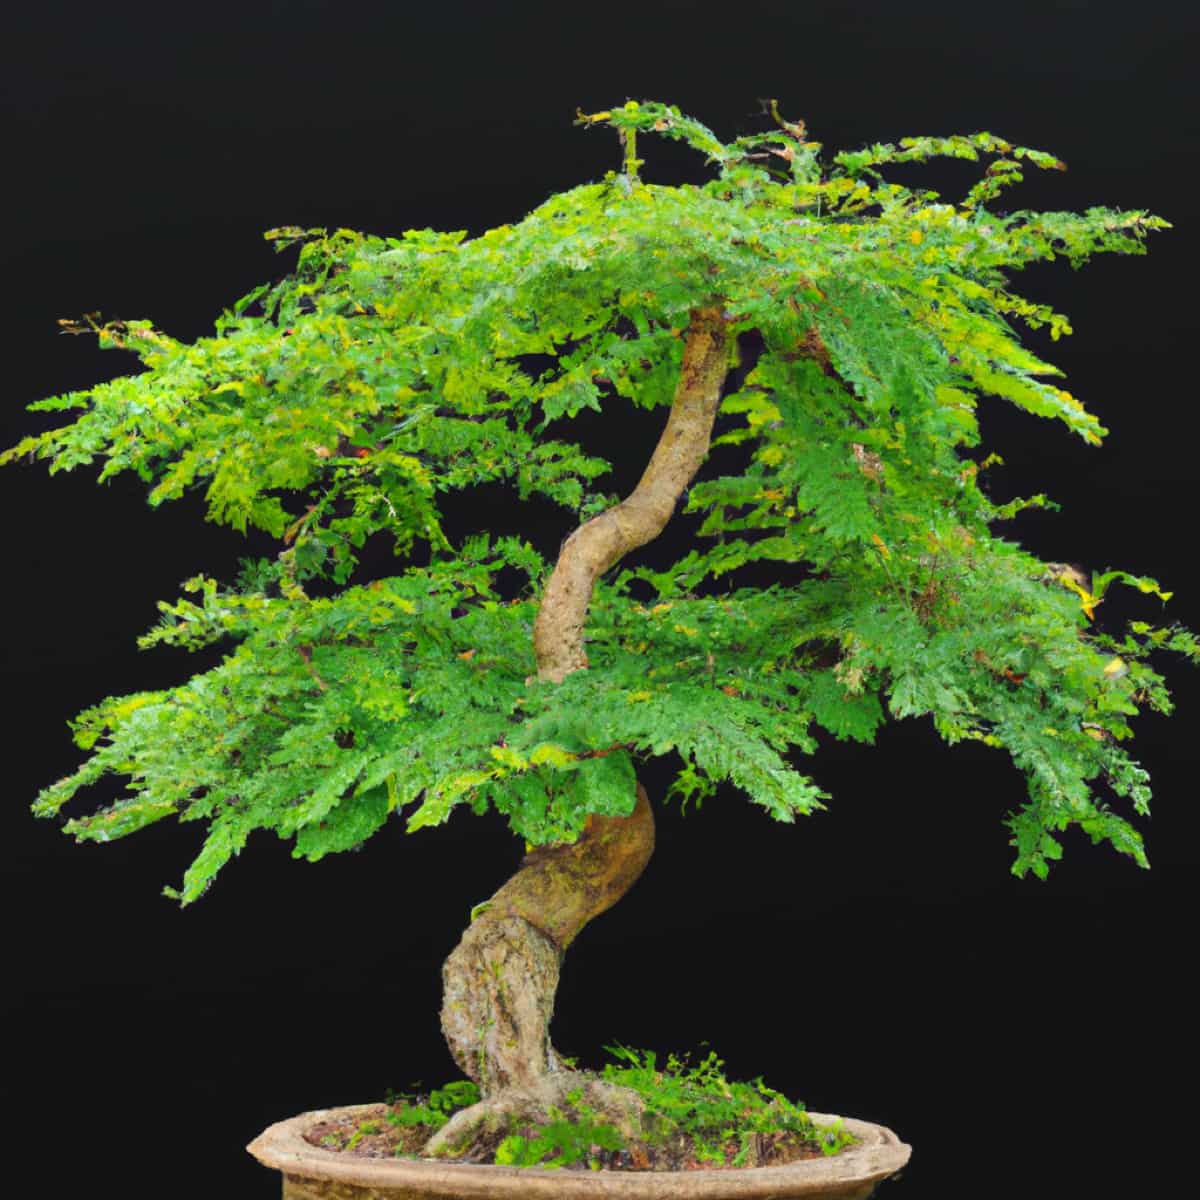 How to Grow and Care for Tamarind Bonsai